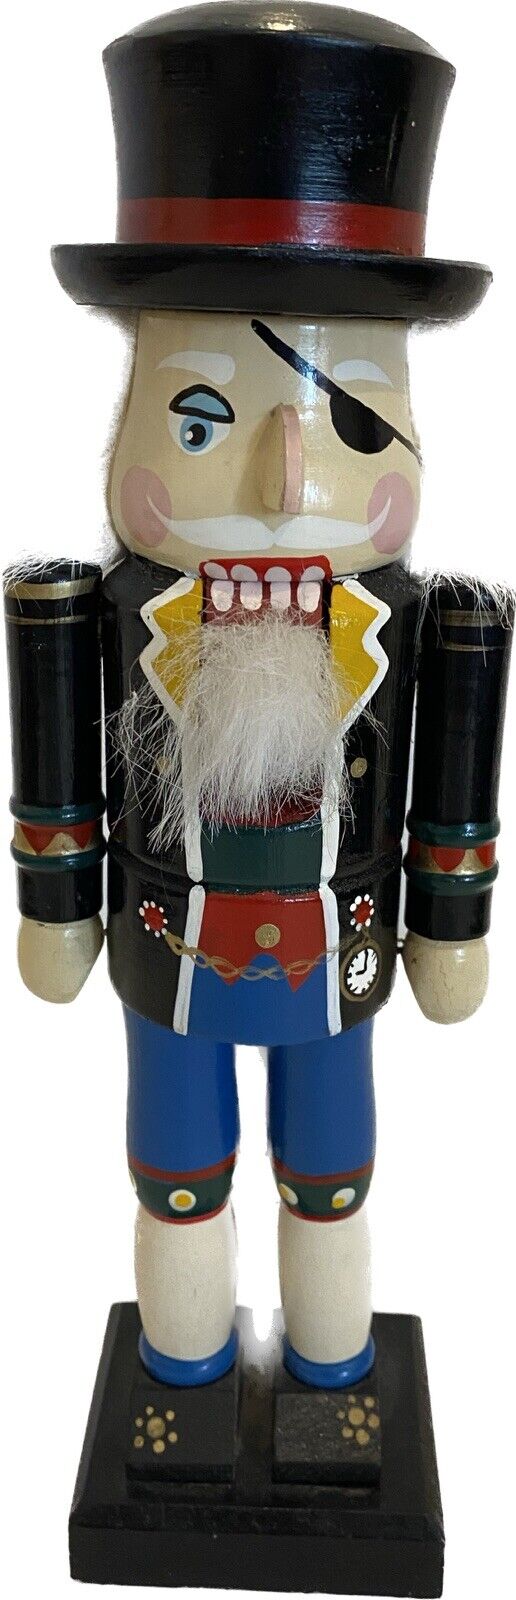 Nutcracker Pirate With Eye Patch 12 Inches Wooden